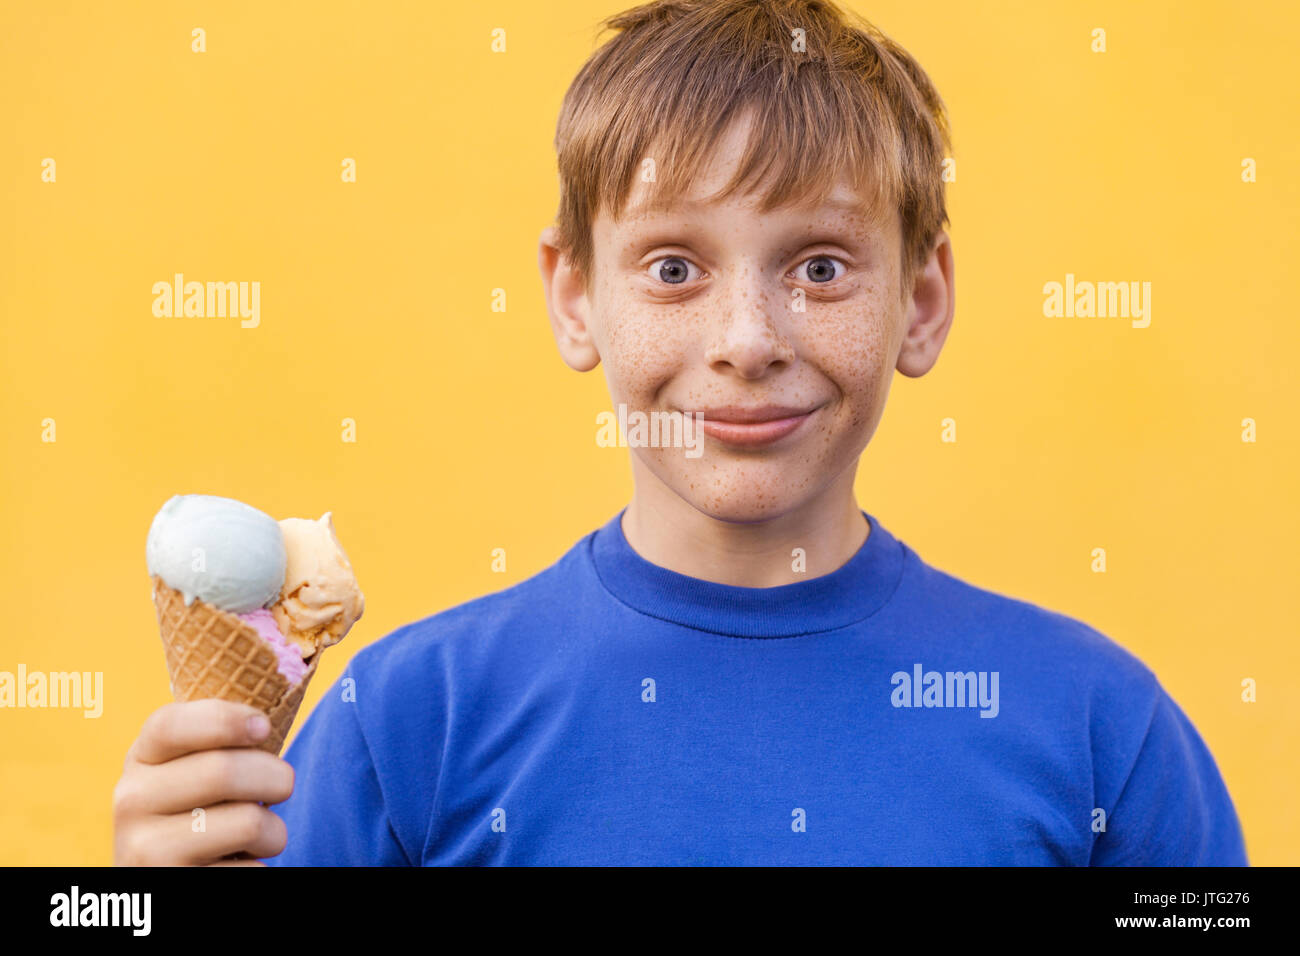 Blonde beautiful boy with freckles and blue t-shirt holds ice cream looking at camera with smile and wonder face . Studio shot, isolated on a yellow b Stock Photo